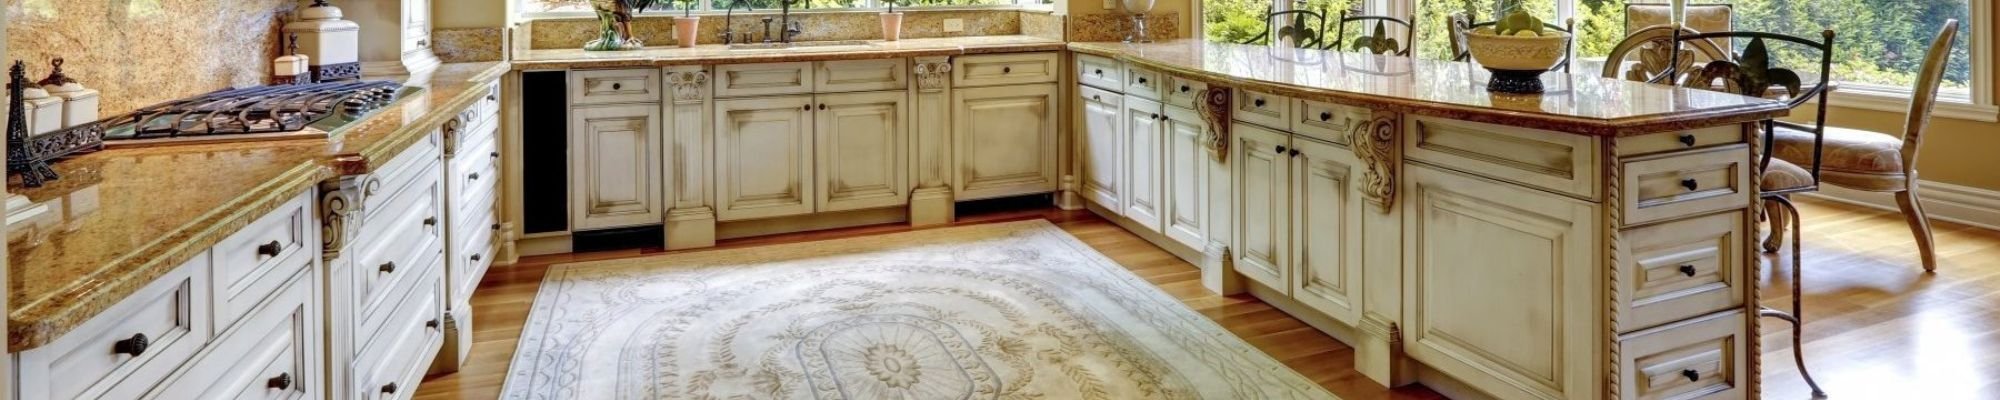 traditional area rug for kitchen from Henson's Greater Tennessee Flooring in Knoxville TN